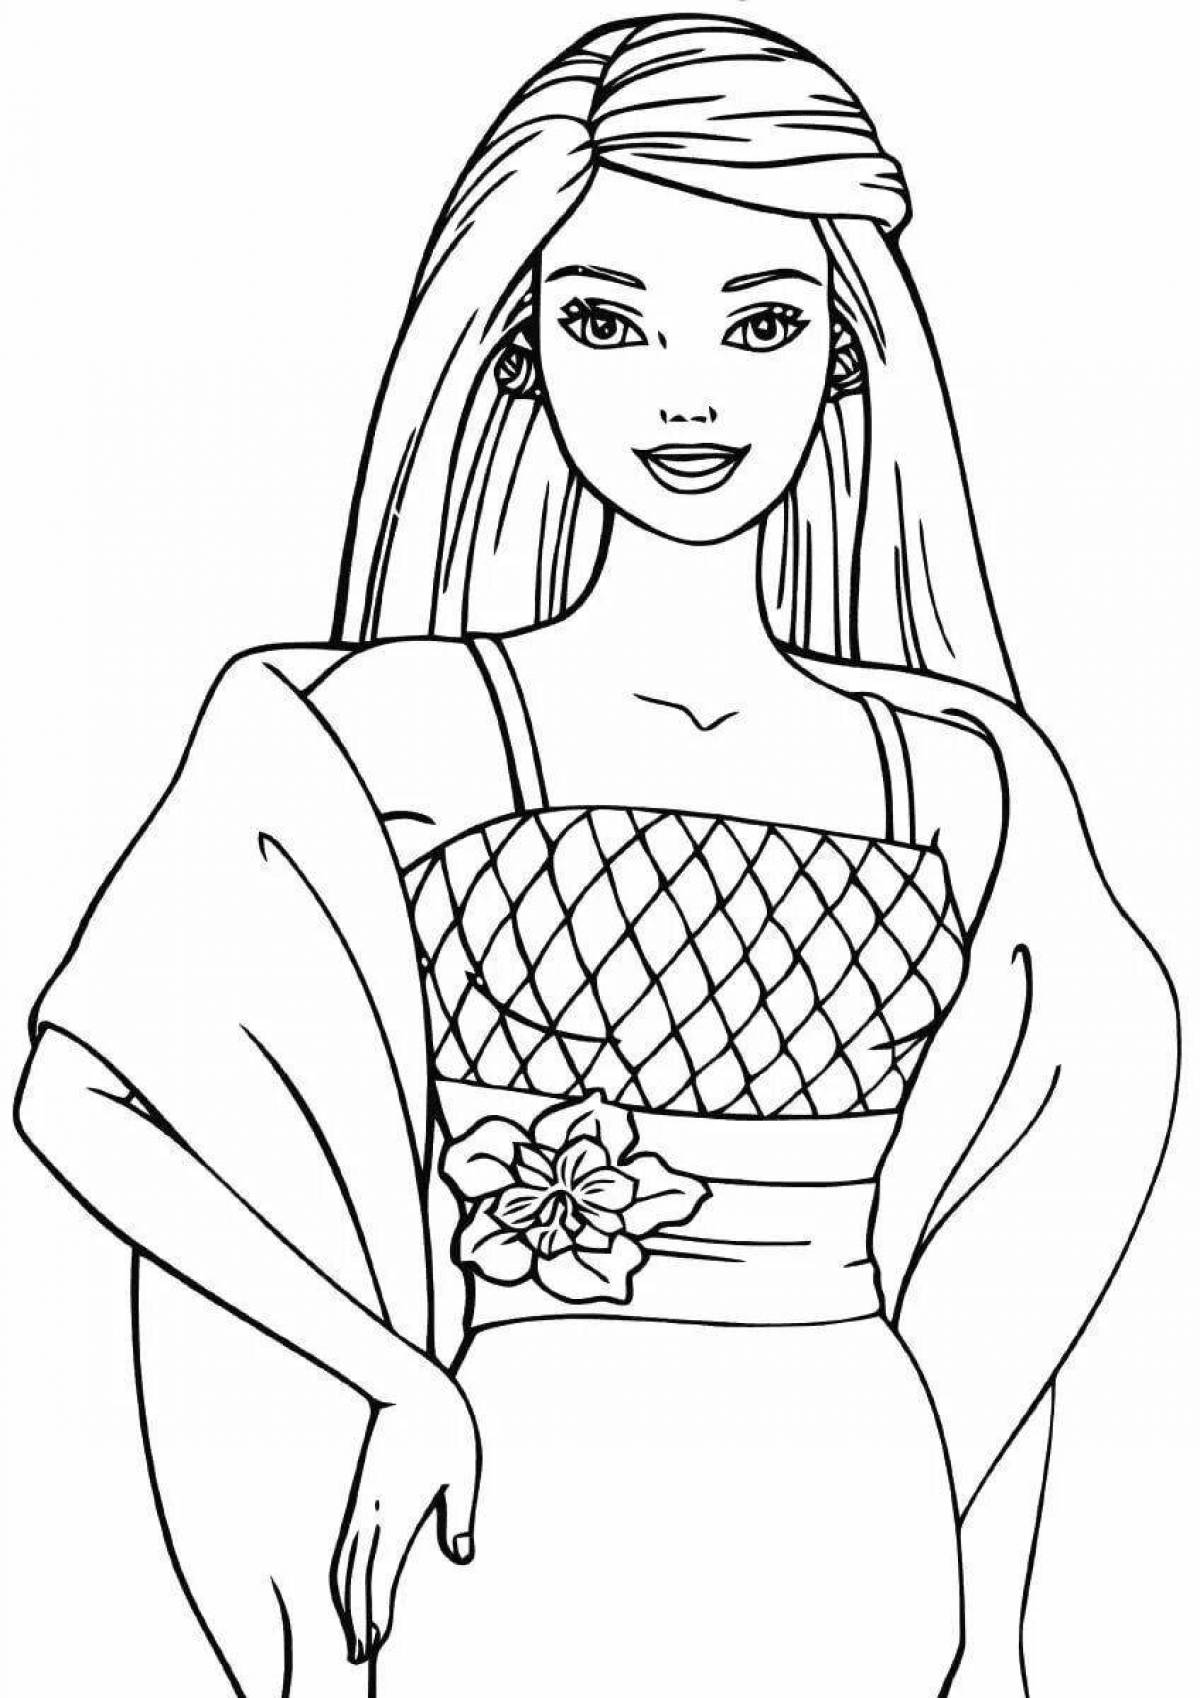 Hypnotic coloring book for girls 9-8 years old